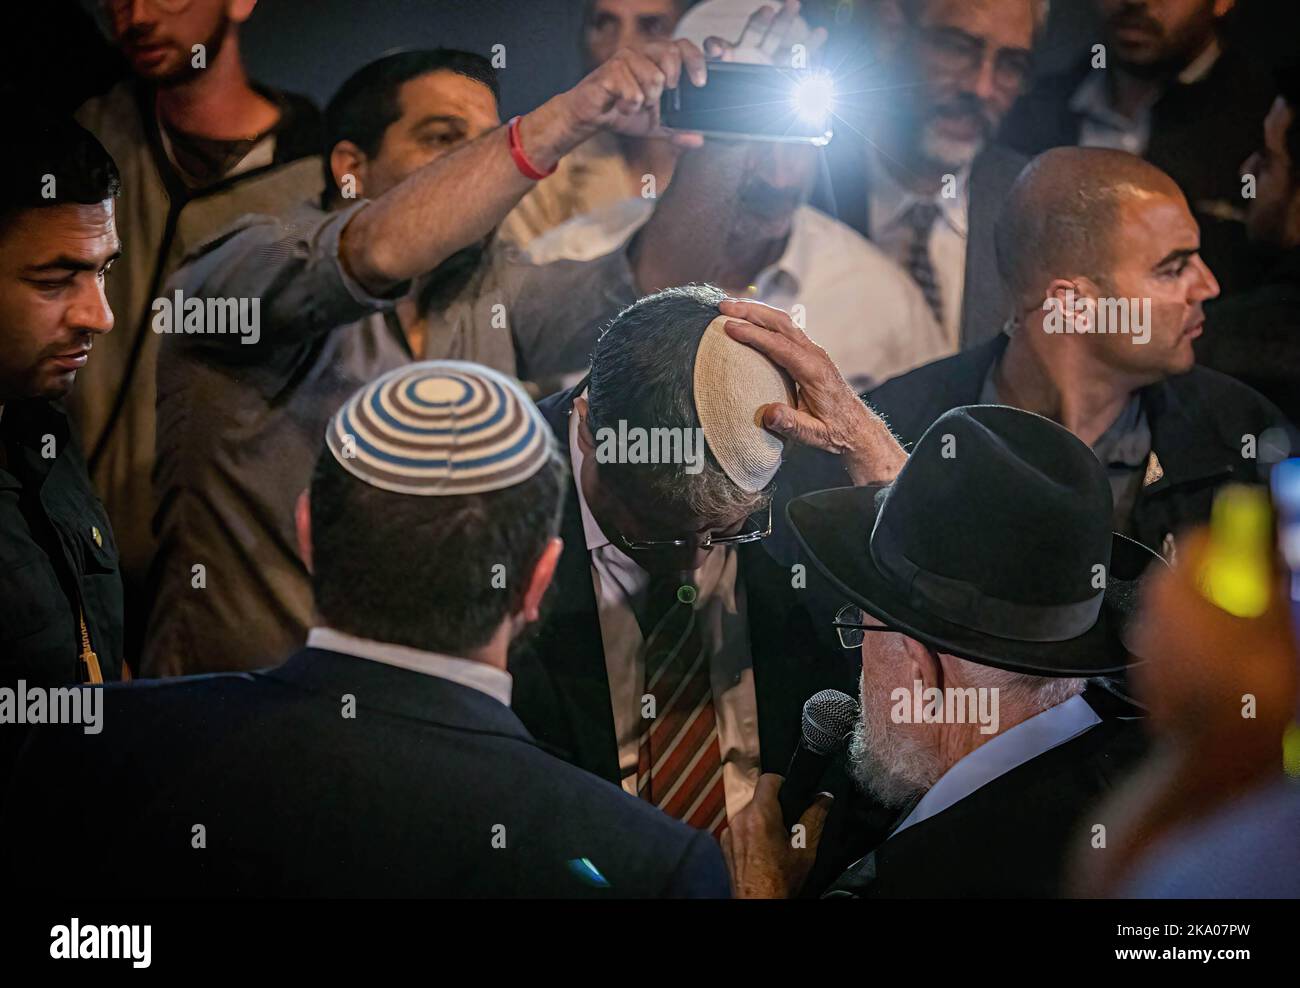 Rabbi Nov Lior spiritual leader of the ultra nationalist far right party Otzma Yehudit, places his hand on the head of the parties political leader Itamar Ben Gvir as he gives him his blessing, during a rally in Jerusalem. Israel's 5th national elections in four years will take place on Nov 1. On Nov 2 Israelis might wake up to a reality in which its nationalist far-right party, Religious Zionism - which includes the ultra-nationalist Otzma Yehudit party will be the third largest party in parliament and a key member of a coalition led by opposition leader and former prime minister Benjamin Net Stock Photo